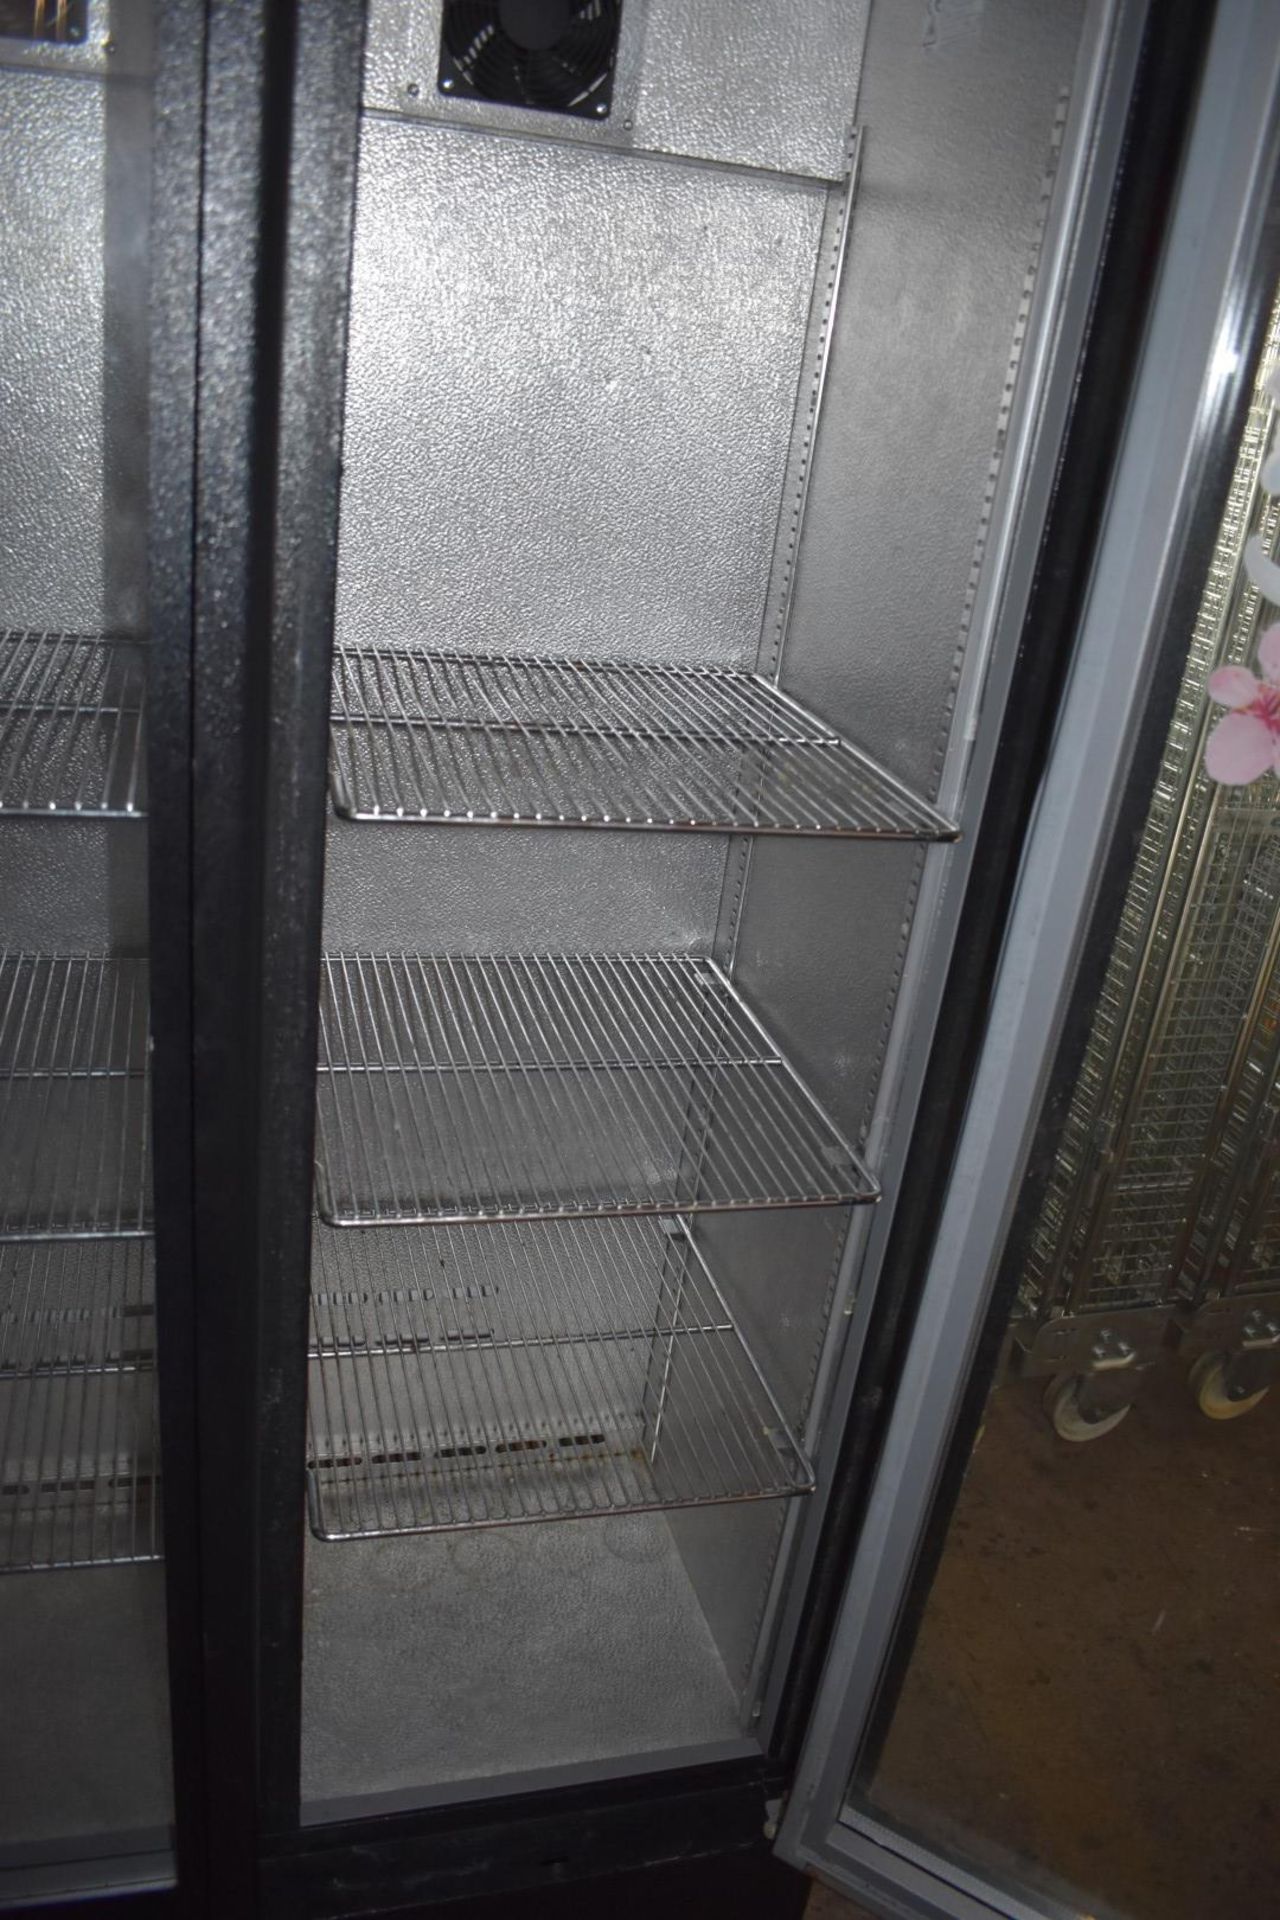 1 x Osborne 350E Two Door Upright Display Drinks Chiller - CL011 - Ref 167 WH3 - Location: - Image 4 of 5